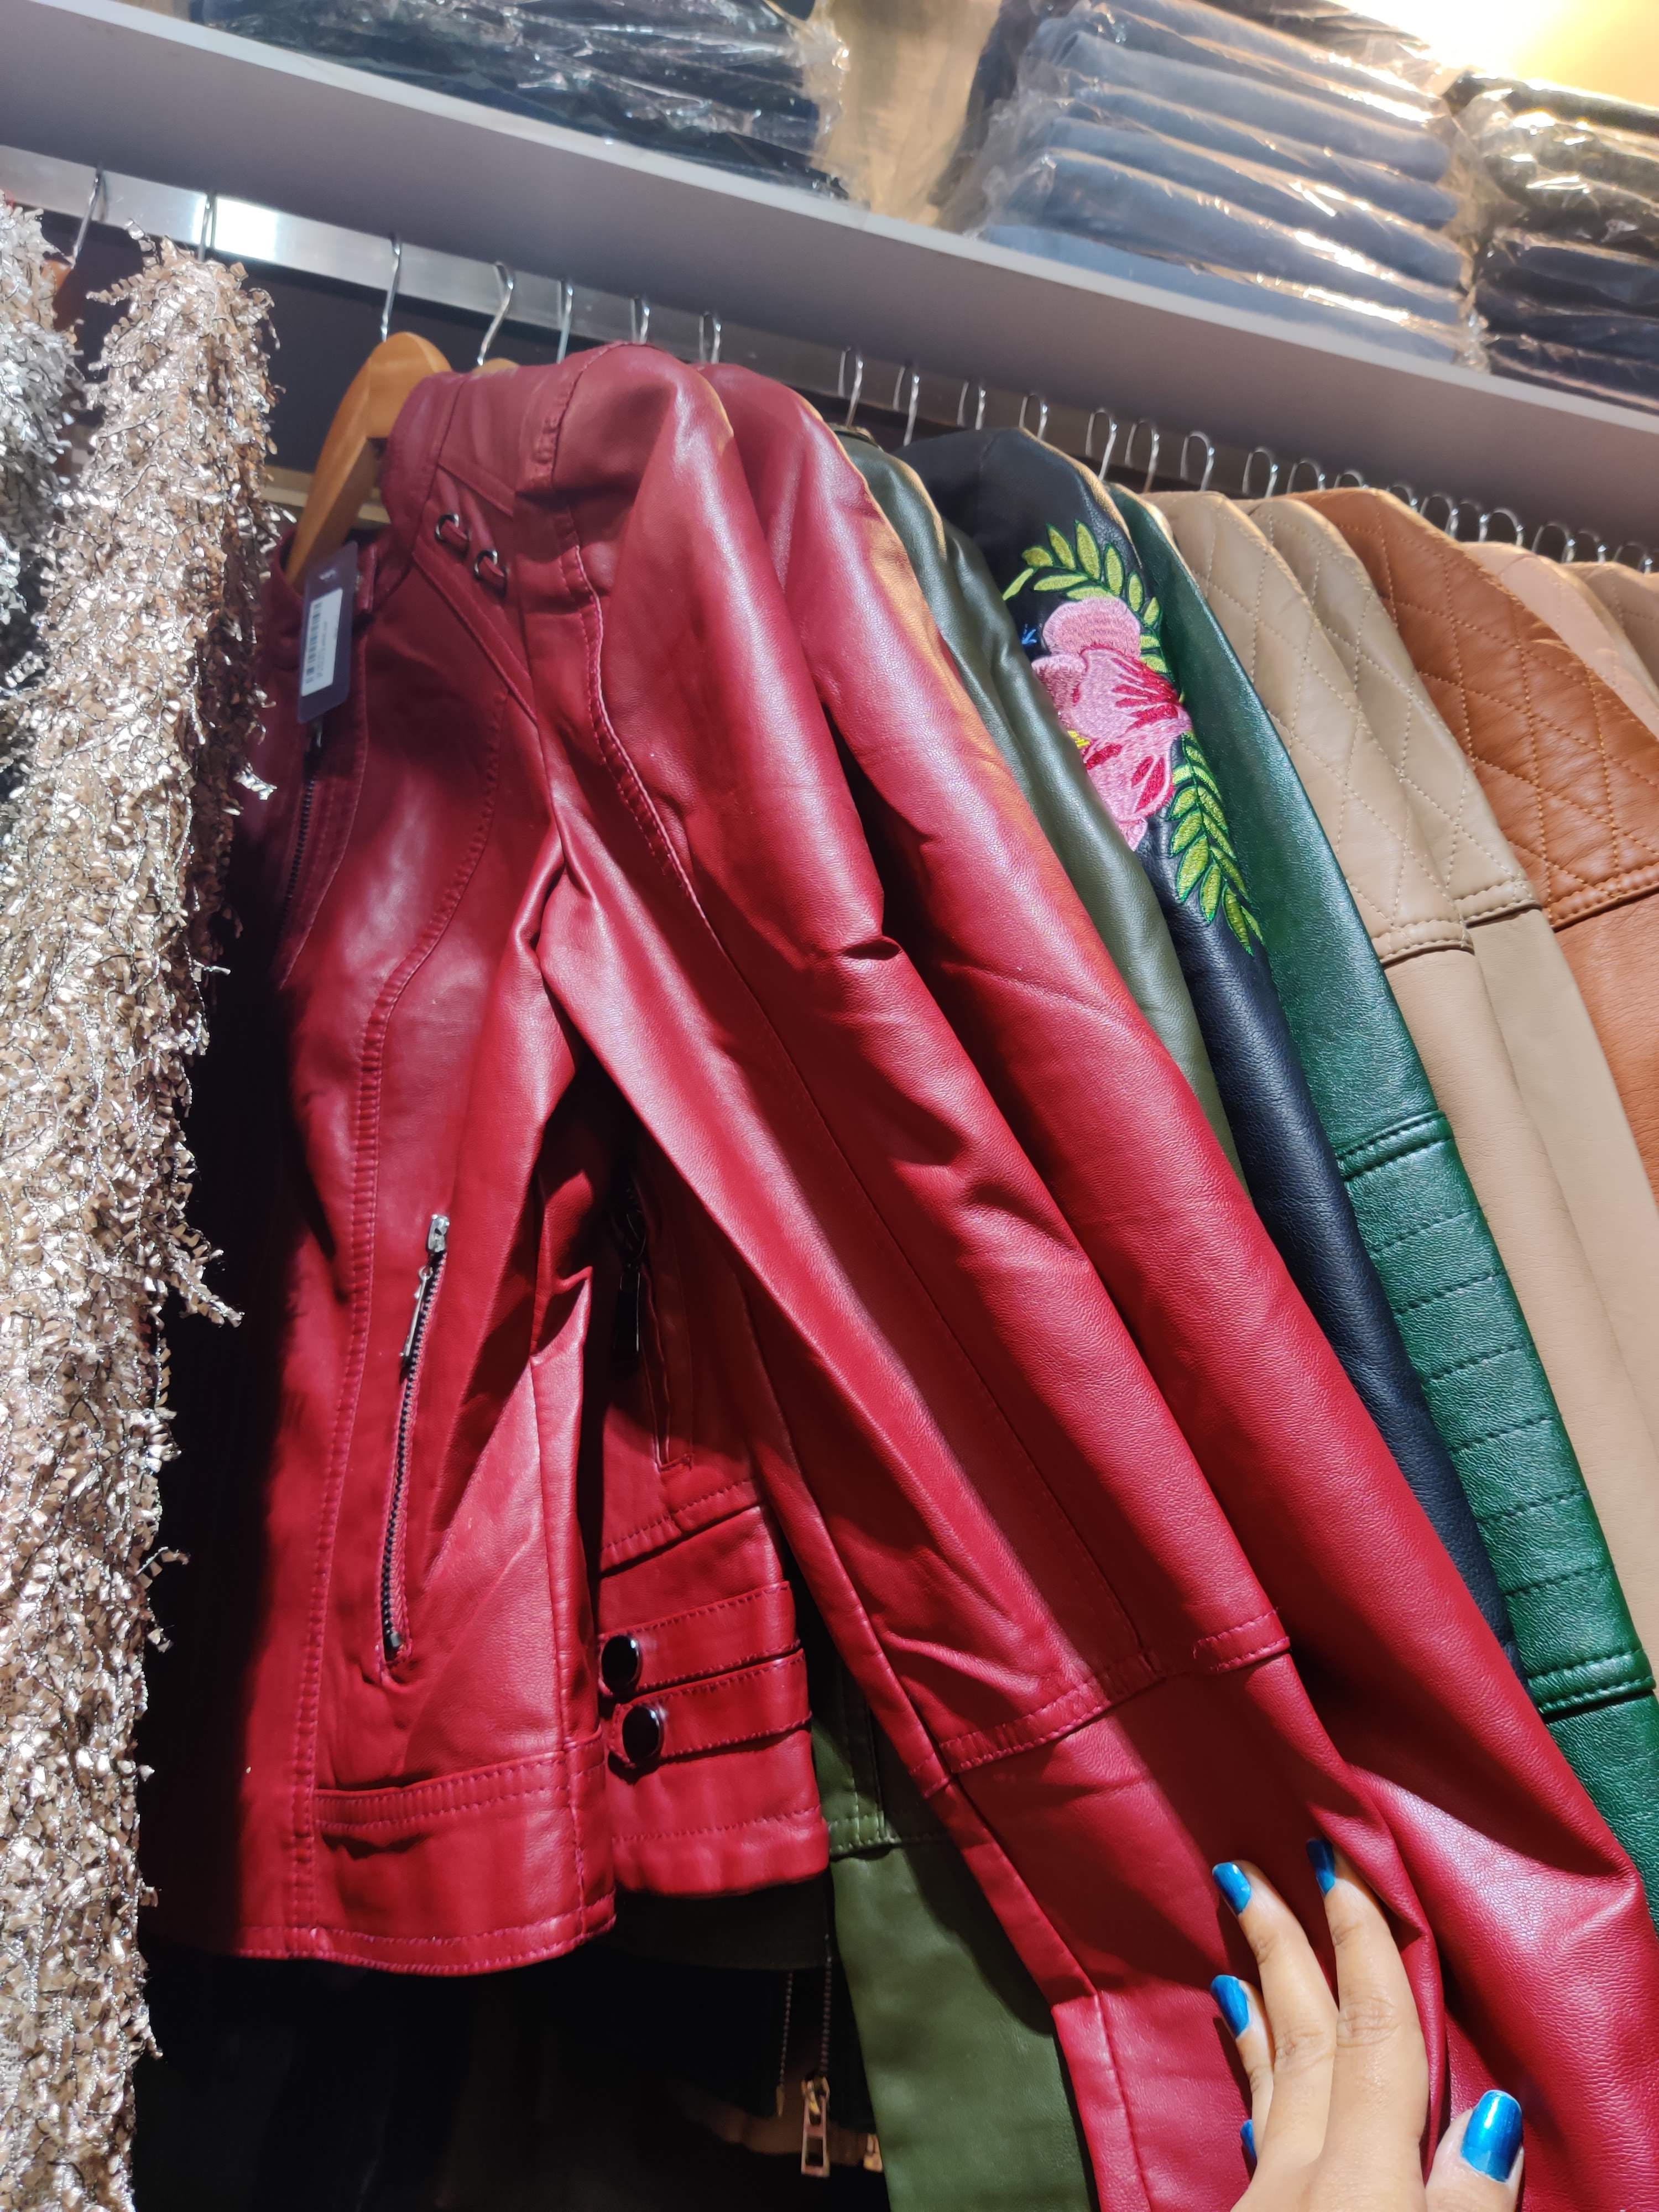 Leather,Clothing,Jacket,Leather jacket,Red,Pink,Textile,Outerwear,Magenta,Room